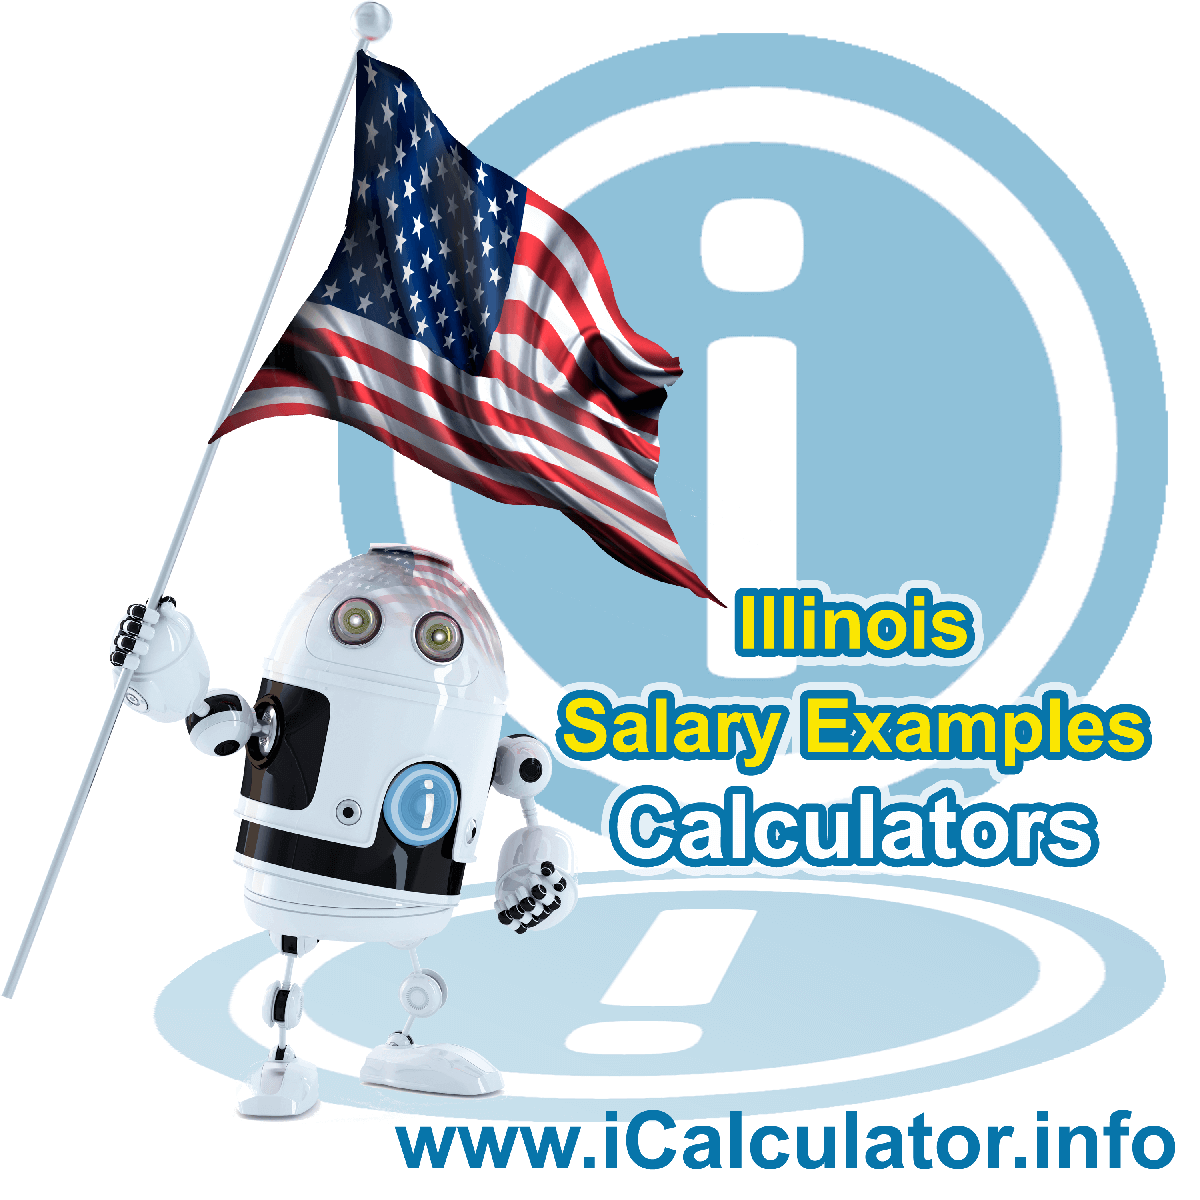 Illinois Salary Example for $ 190,000.00 in 2023 | iCalculator™ | $ 190,000.00 salary example for employee and employer paying Illinois State tincome taxes. Detailed salary after tax calculation including Illinois State Tax, Federal State Tax, Medicare Deductions, Social Security, Capital Gains and other income tax and salary deductions complete with supporting Illinois state tax tables 